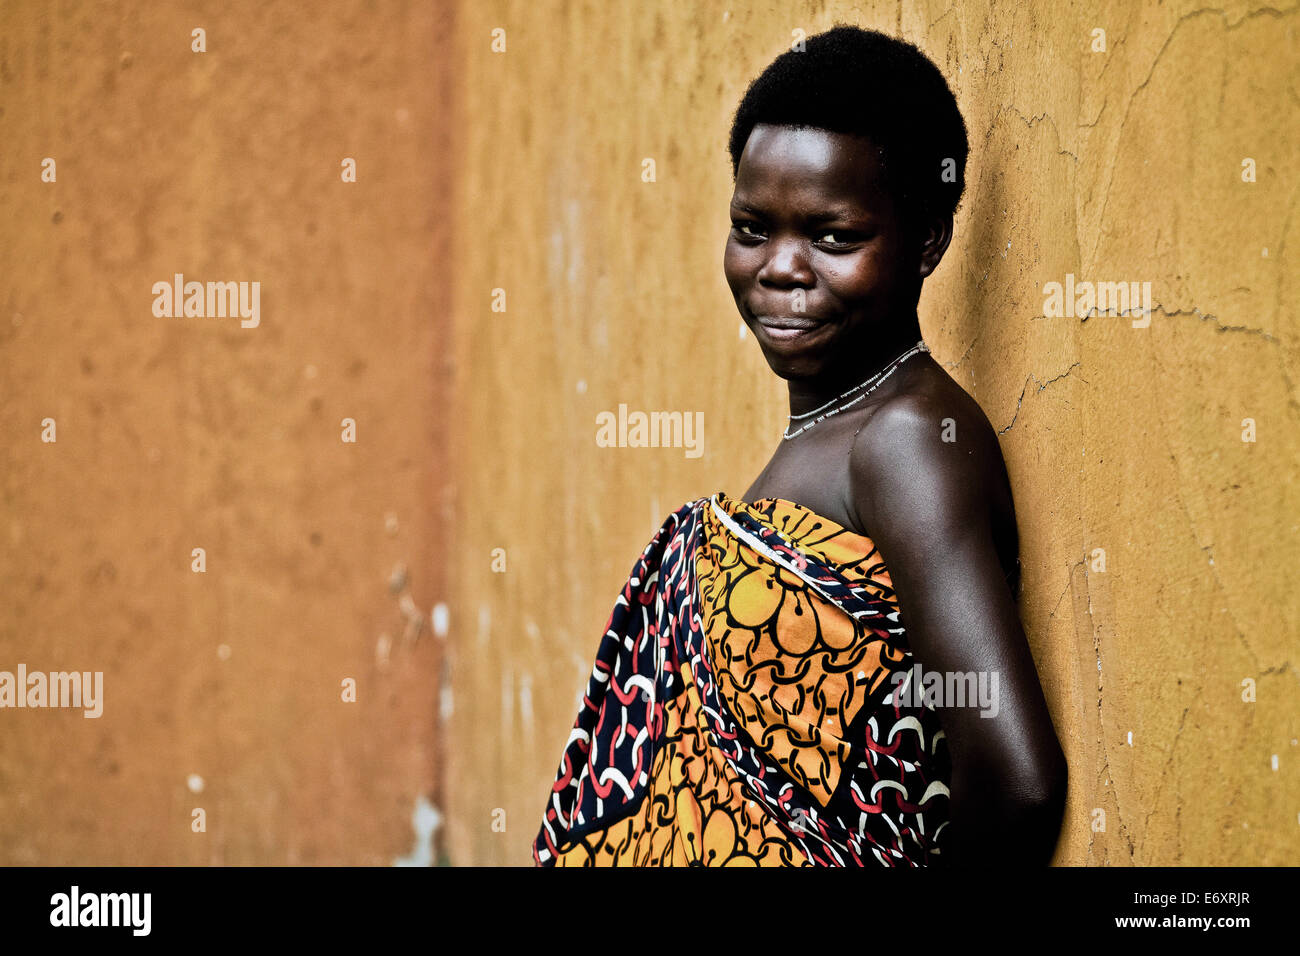 Young woman in traditional Kanga in front of a yellow wall, Uganda, Africa Stock Photo